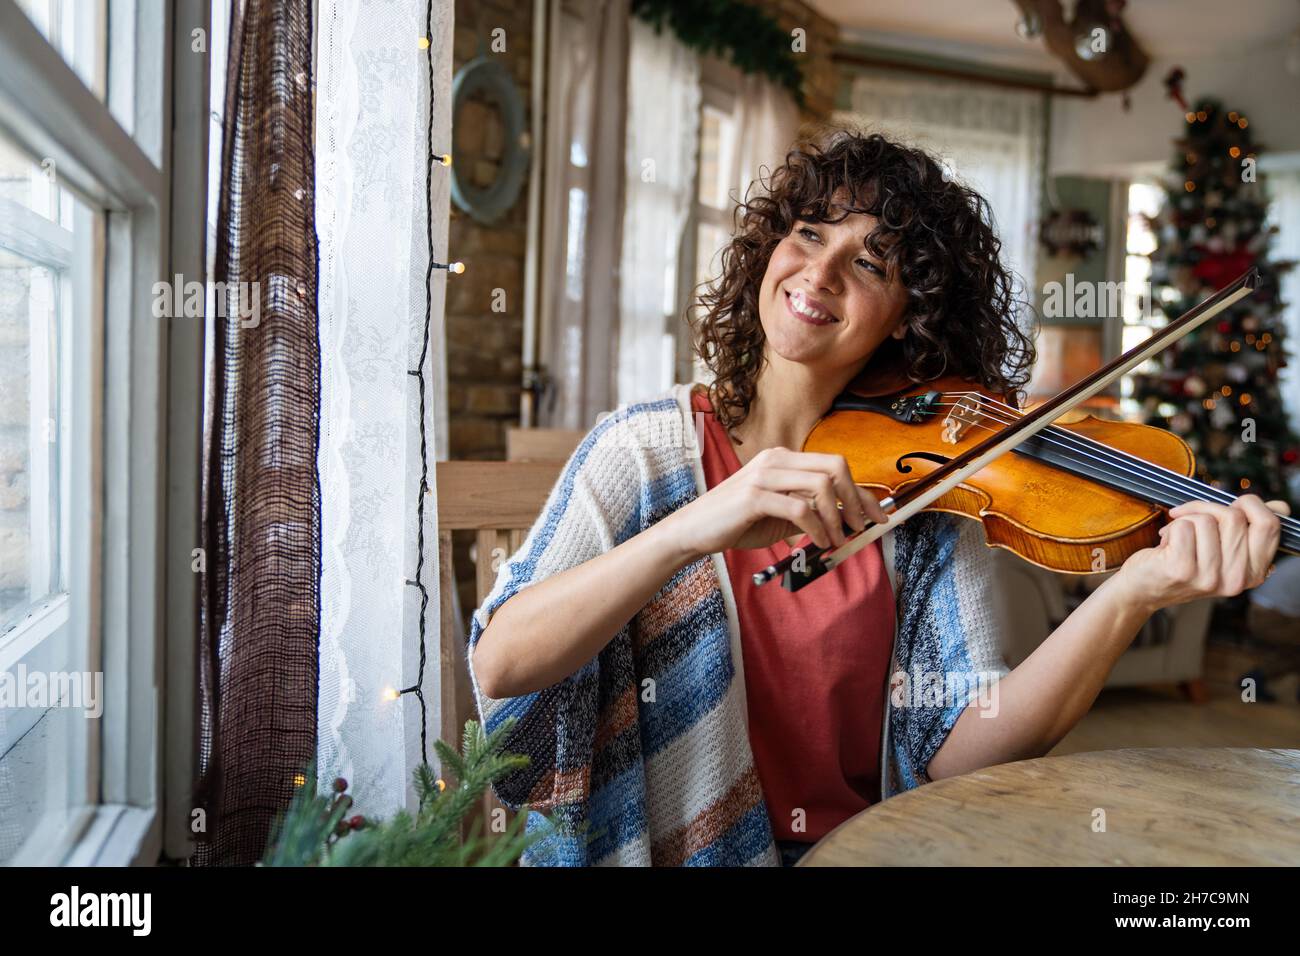 Attractive young woman musician plays the violin practicing musical instrument Stock Photo